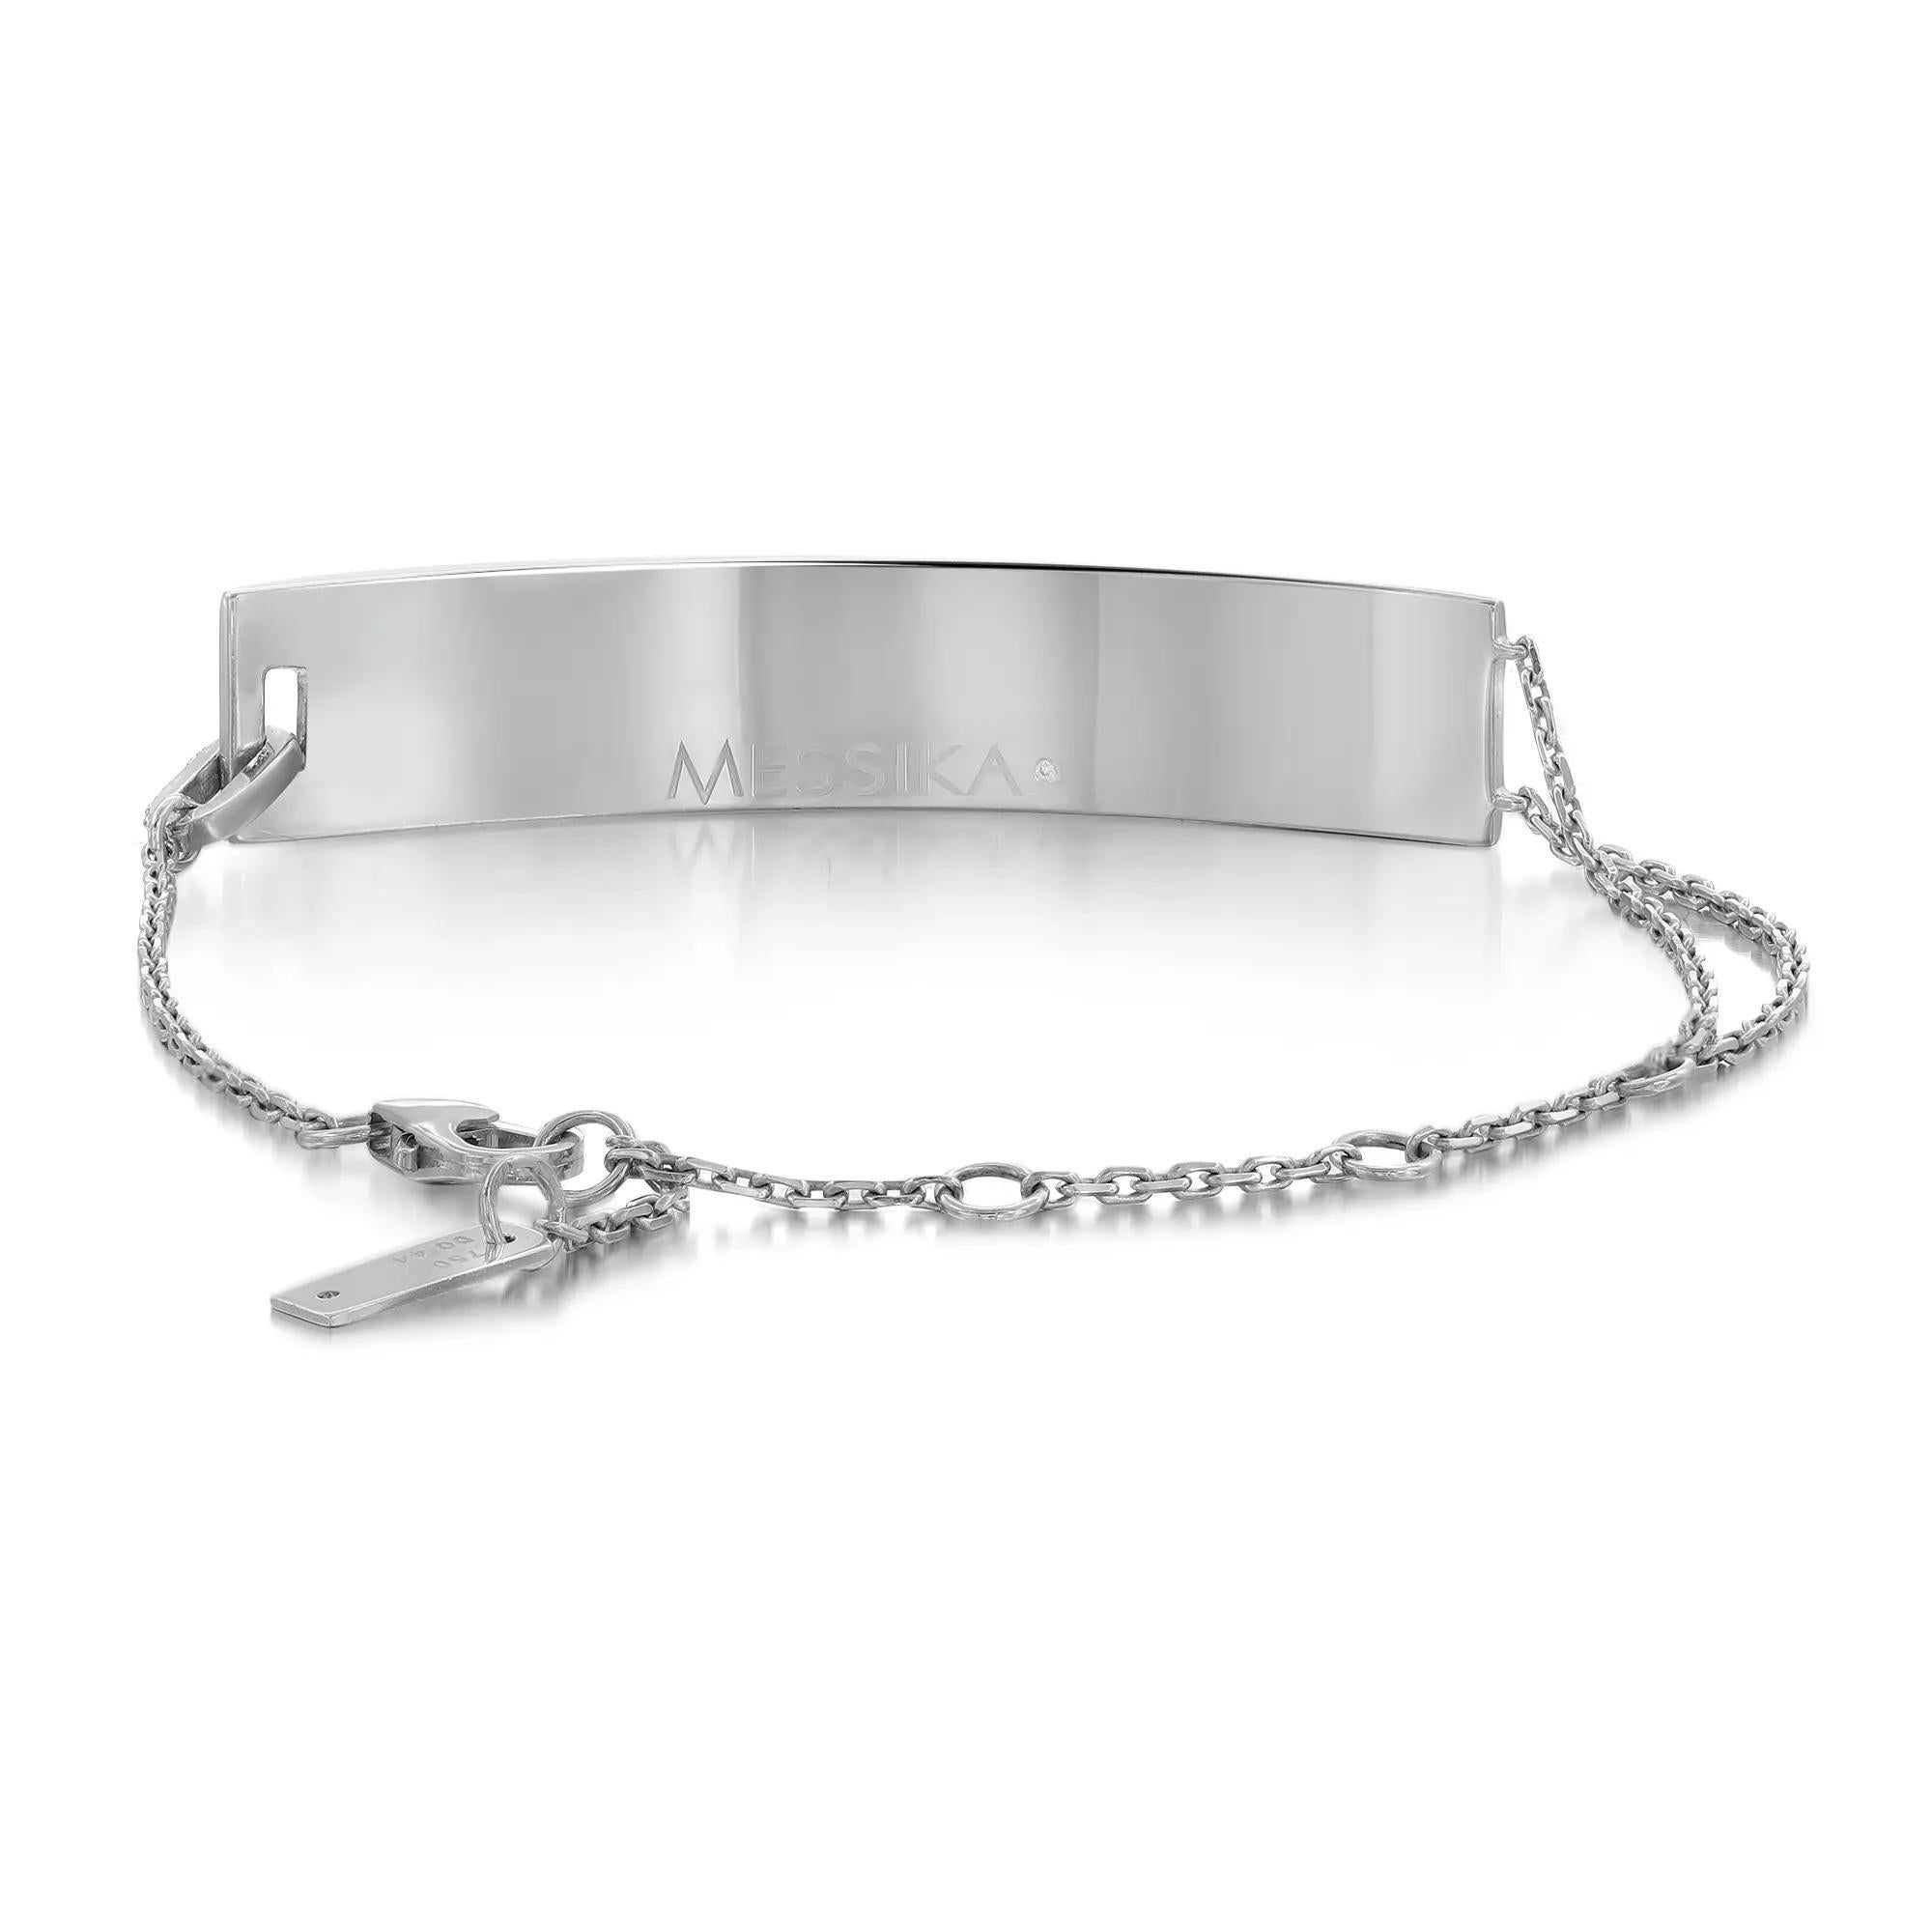 Modern Messika 0.44Cttw Kate Sur Chaine Diamond Bracelet 18K White Gold 7.5 Inches For Sale